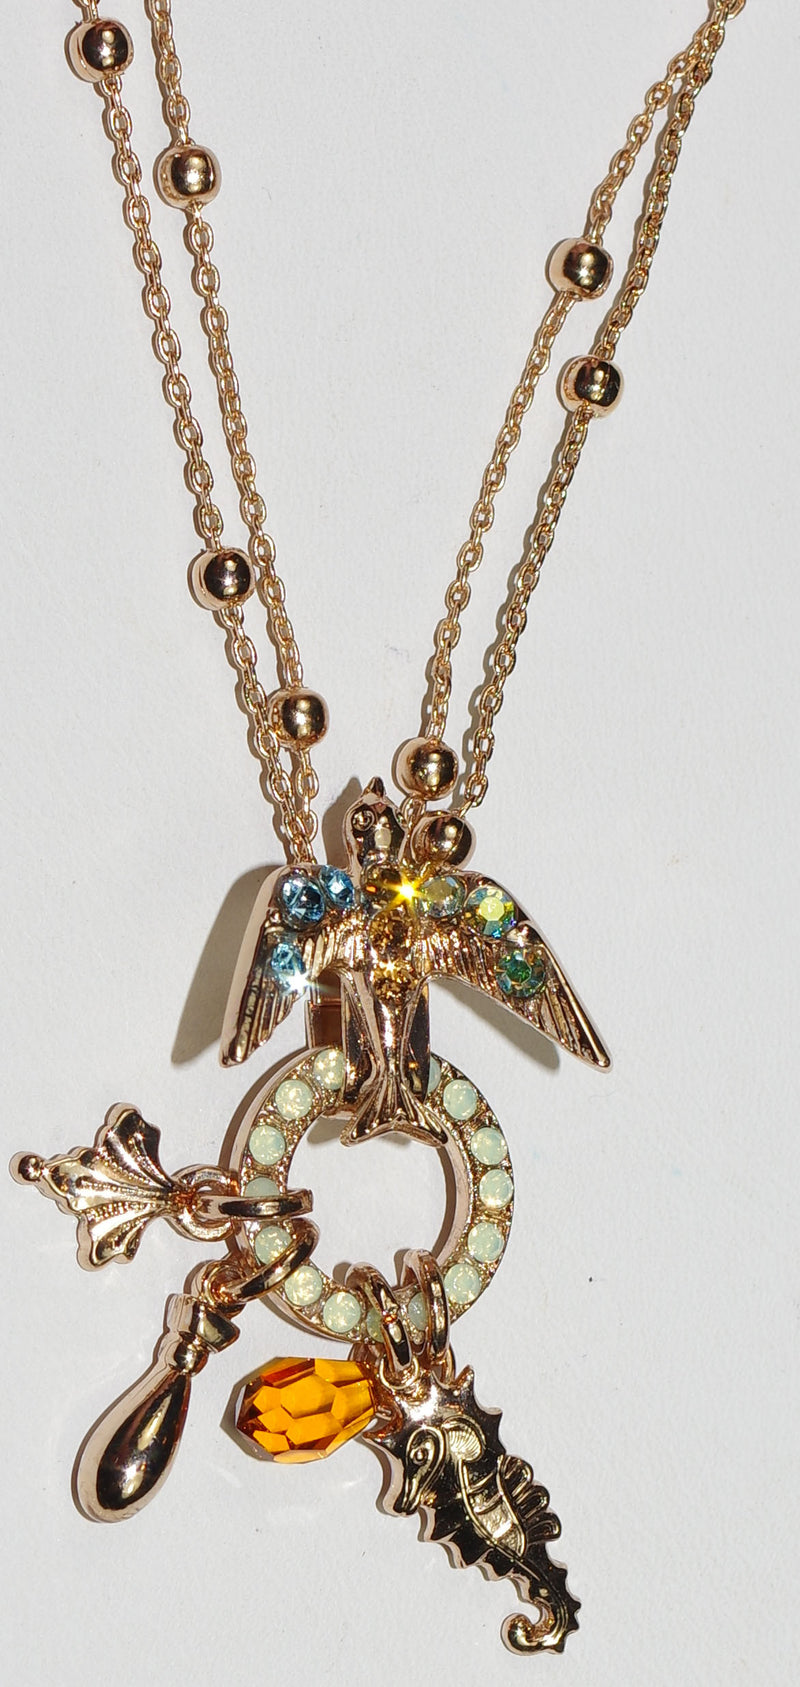 MARIANA PENDANT FORGET ME NOT: green, blue, a/b, amber stones in 2" rose gold setting, 18" adjustable double chain